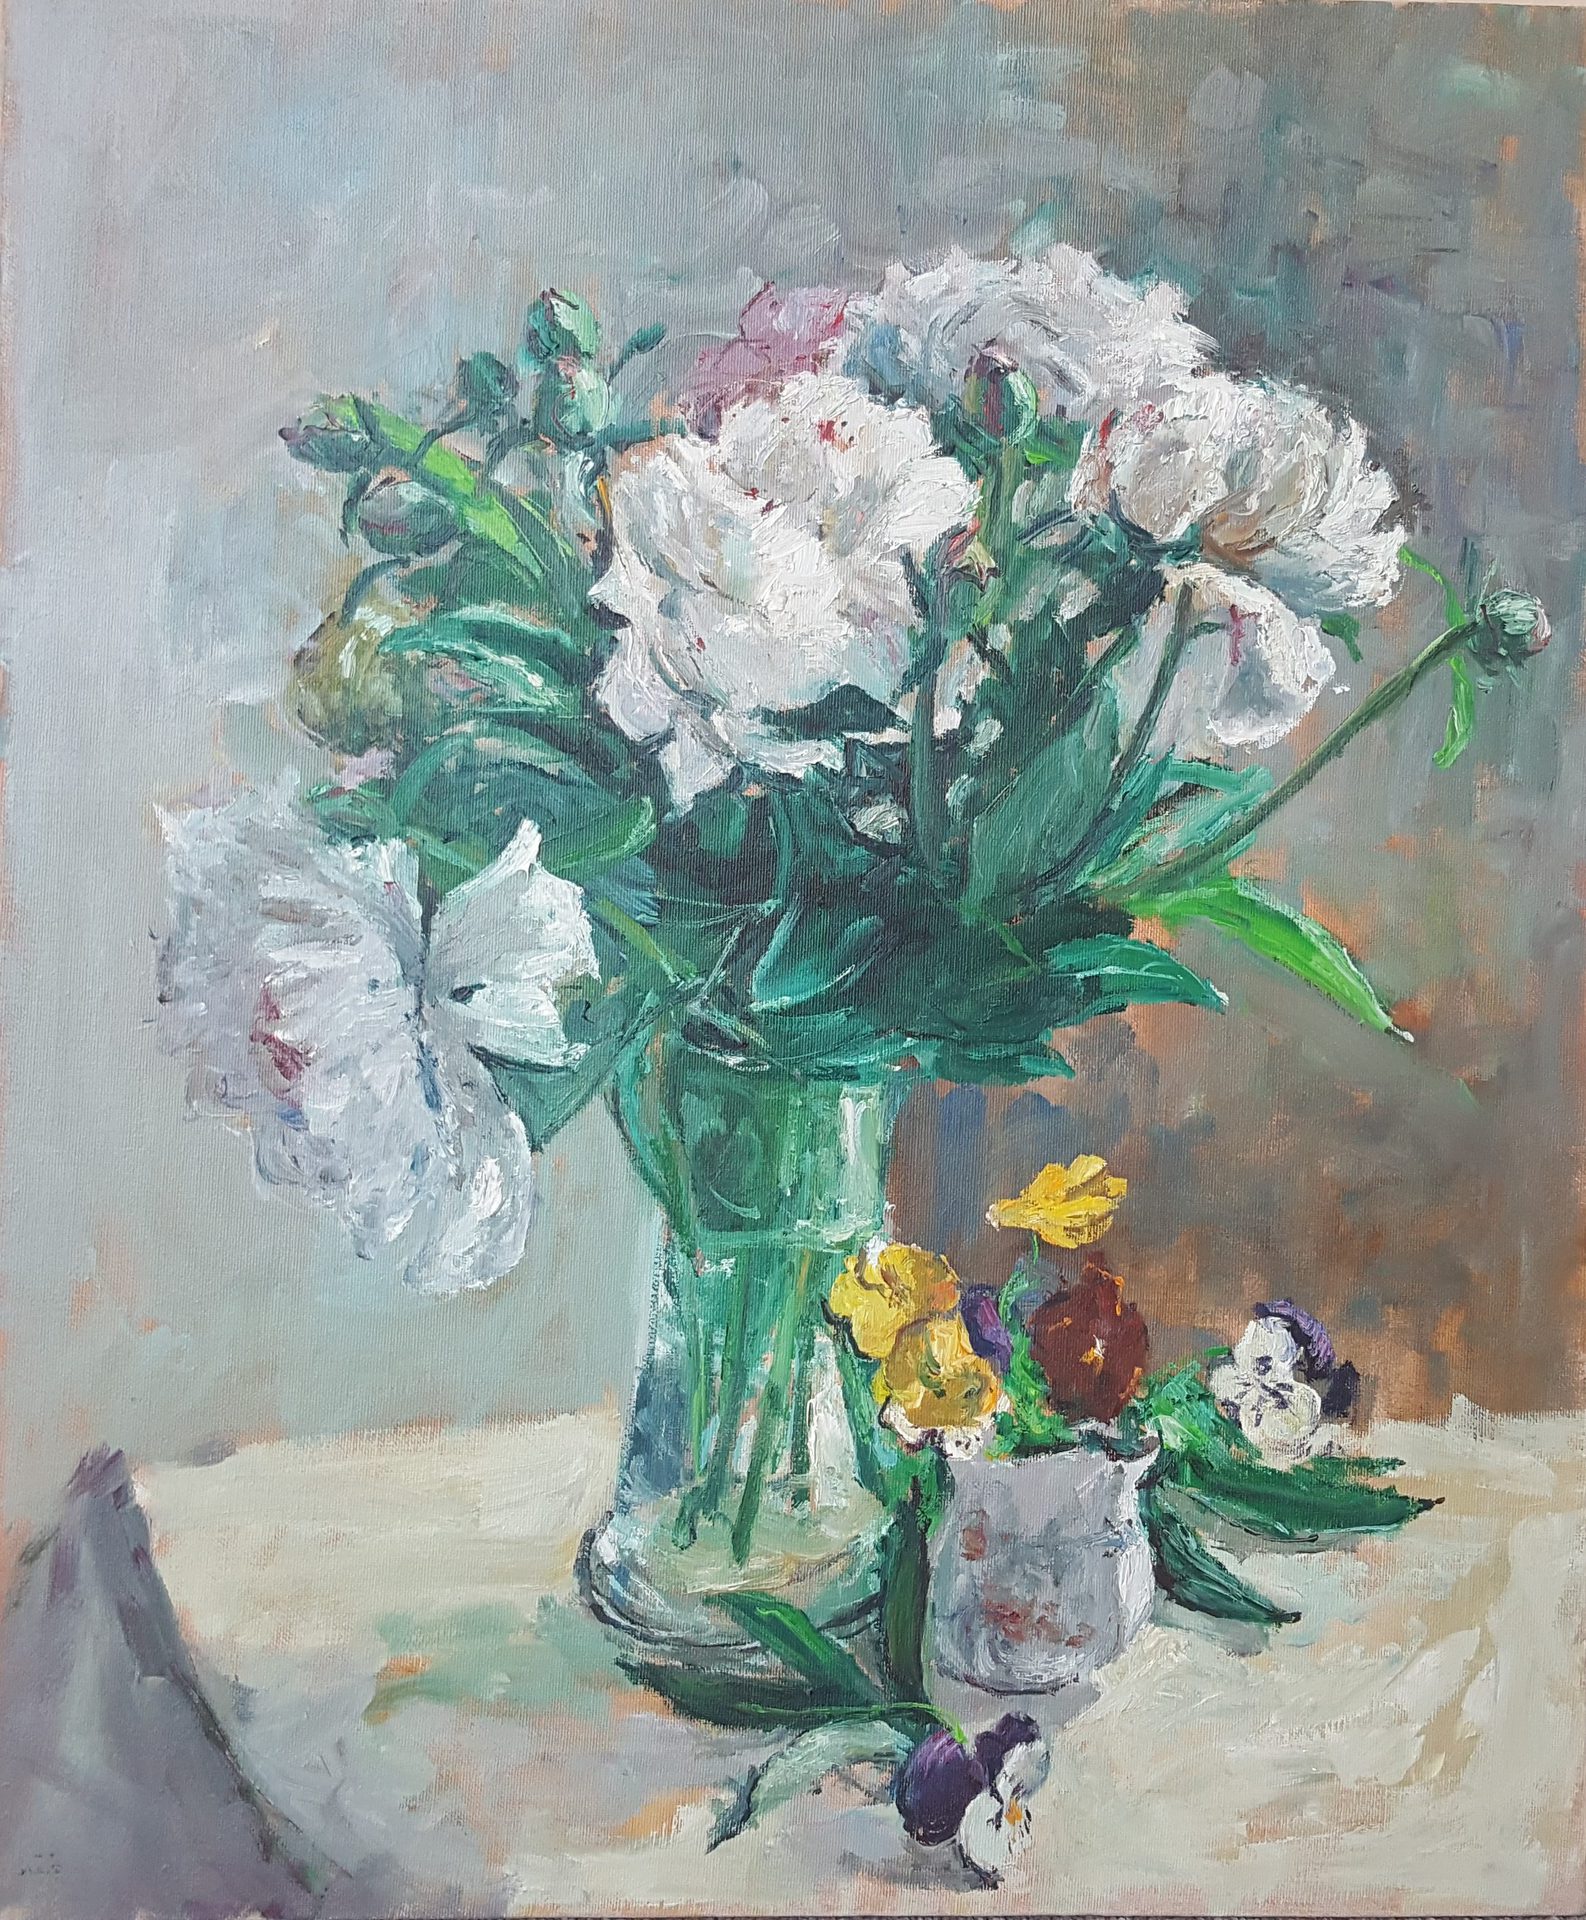 Zivko Zic. Still Life with Peonies. The peonies are arranged in a thin glass vase. In addition, a small cup of yellow flowers sits beside. All sit in front of a light grey background.